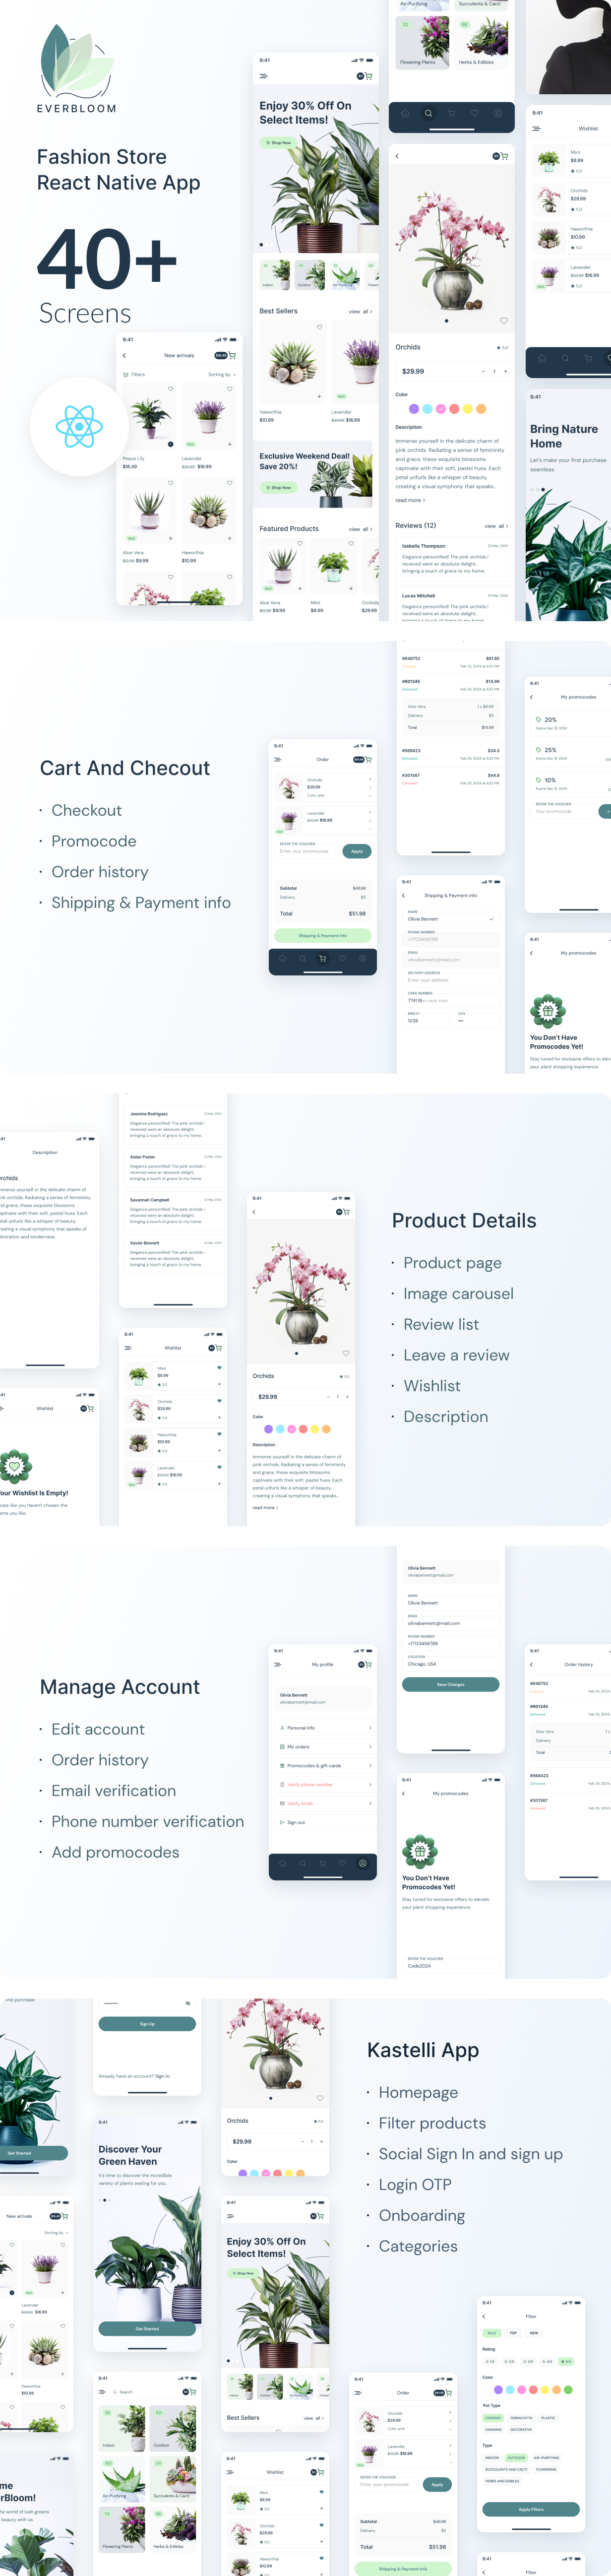 Everbloom - Plant Online Store | Full Solution | Frontend + Backend + Admin Panel - 4